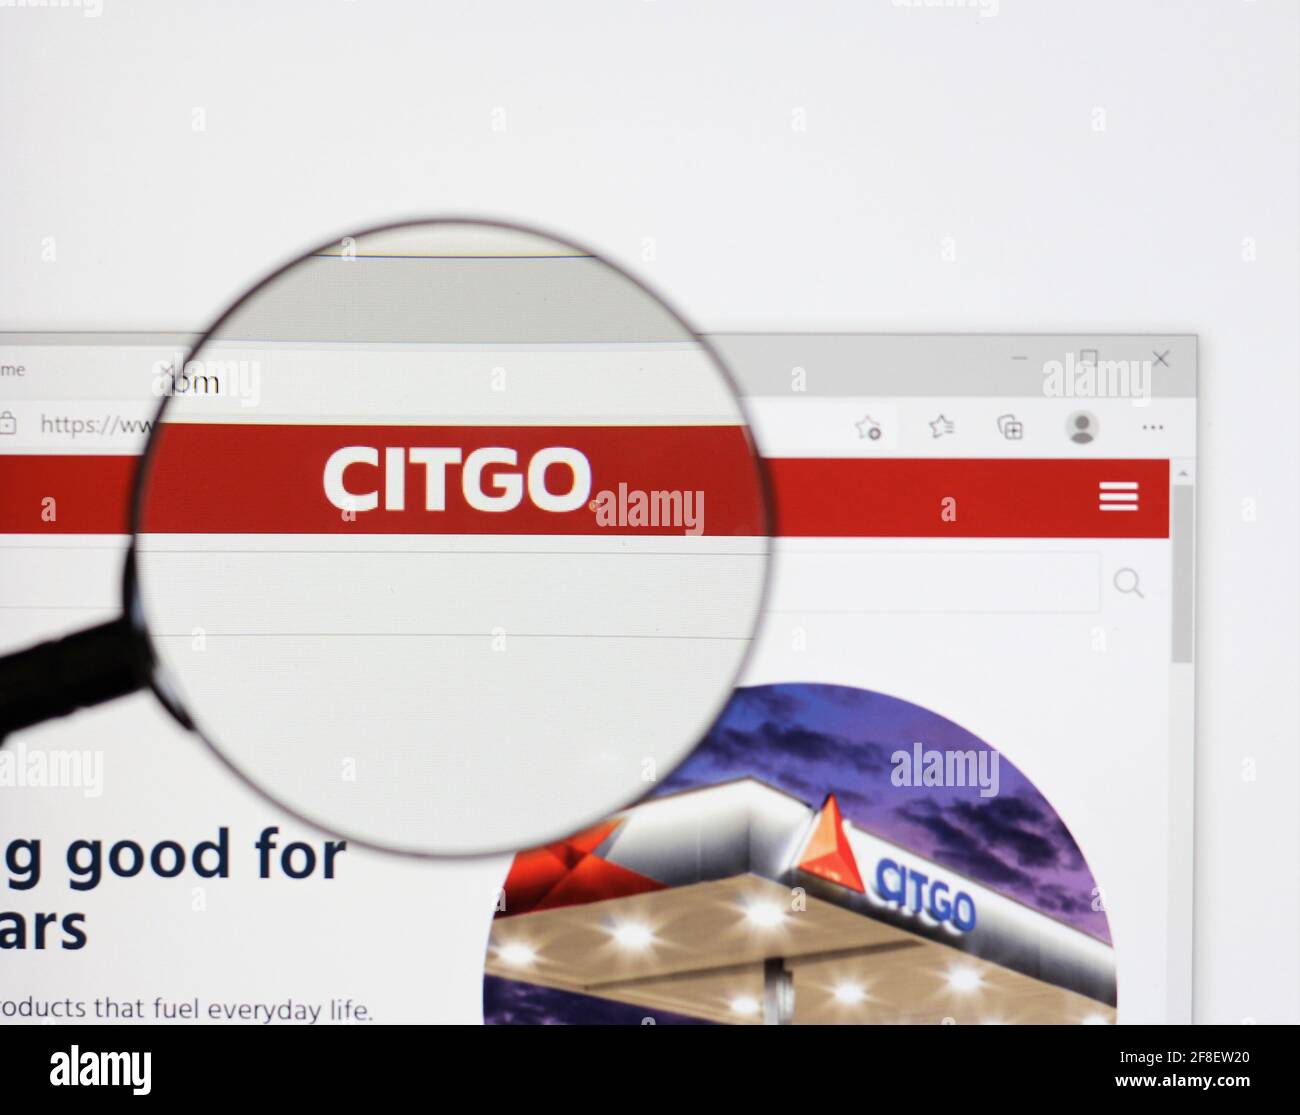 Citgo Petroleum Corporation or Citgo,  is a US based refiner, transporter and marketer of transportation fuels, lubricants, petrochemicals and other Stock Photo